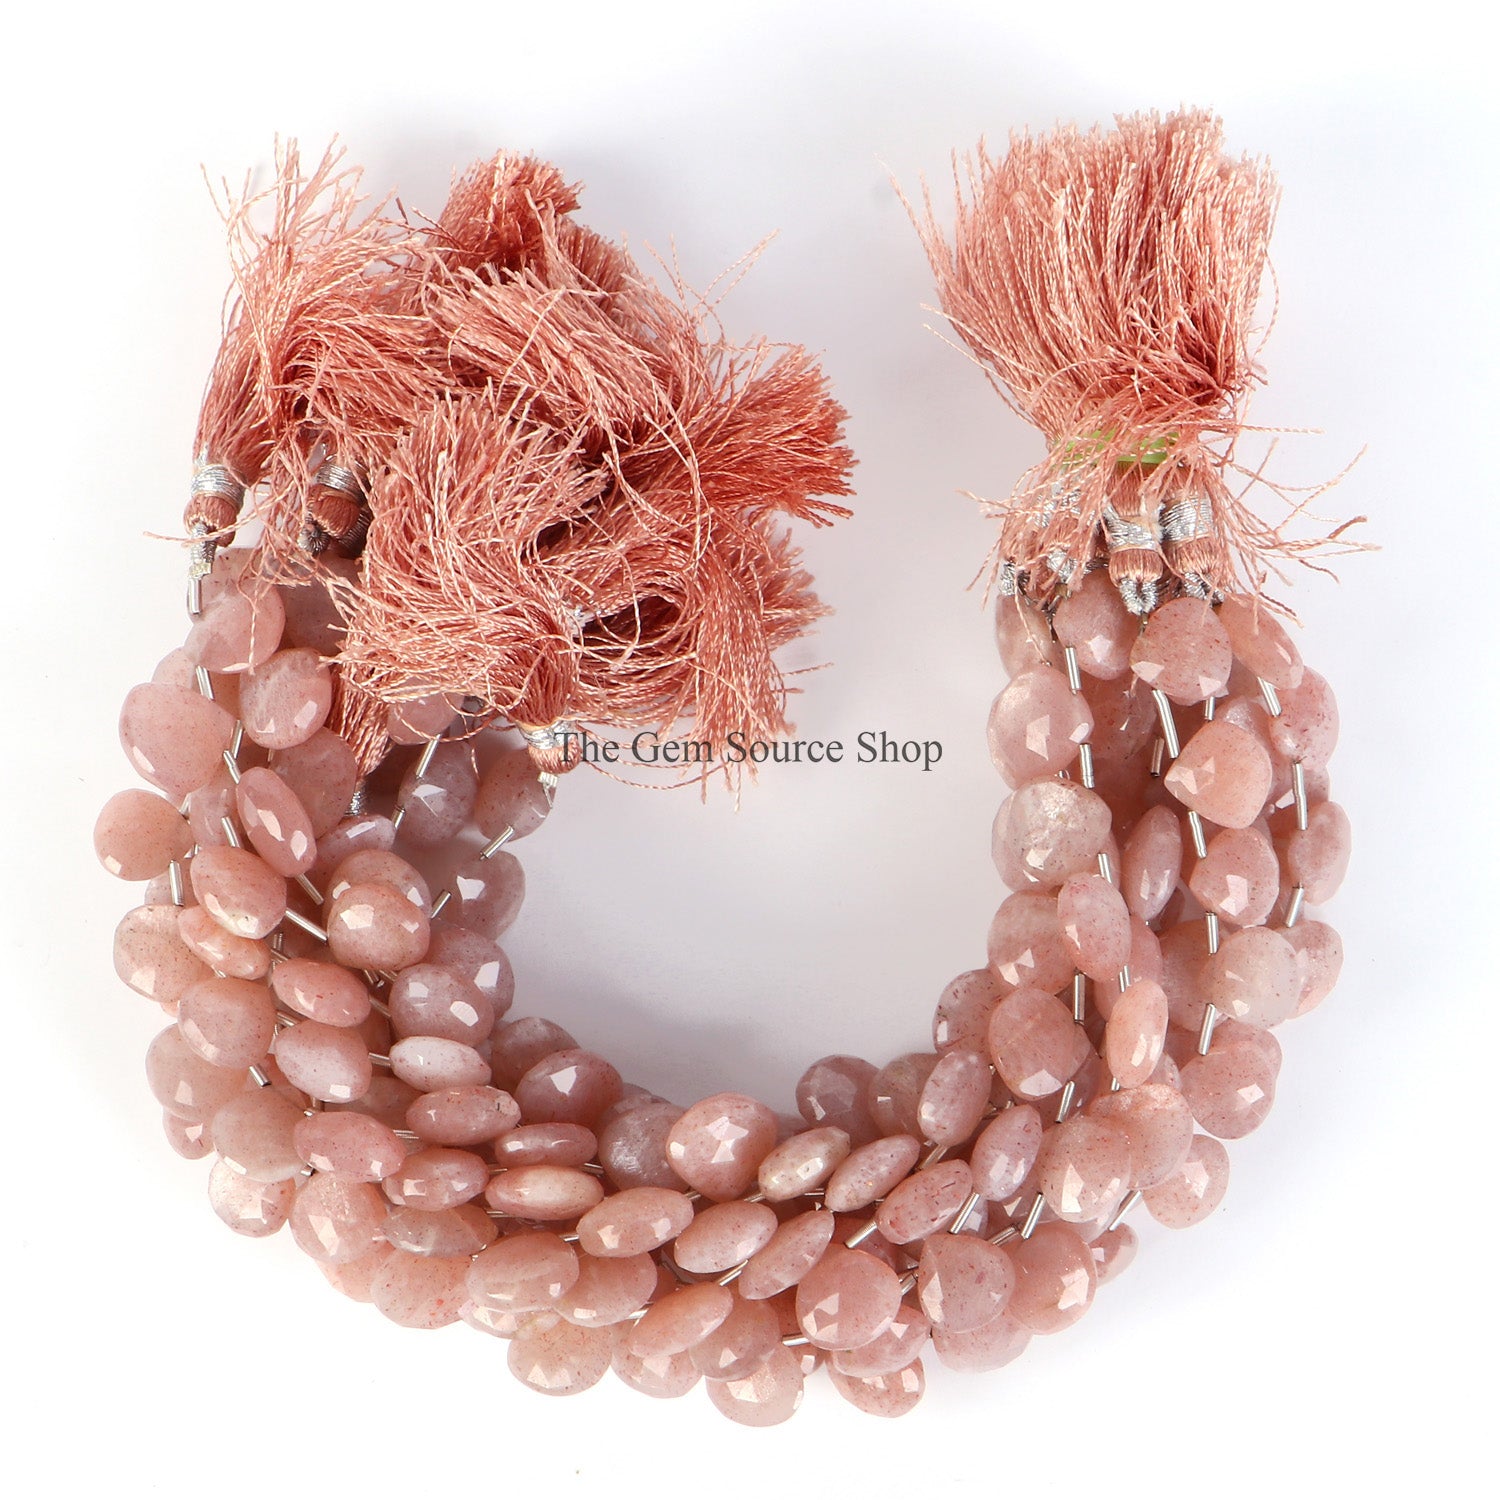 11-12mm Peach Moonstone Faceted Loose Gemstone Heart Beads, TGS-2679